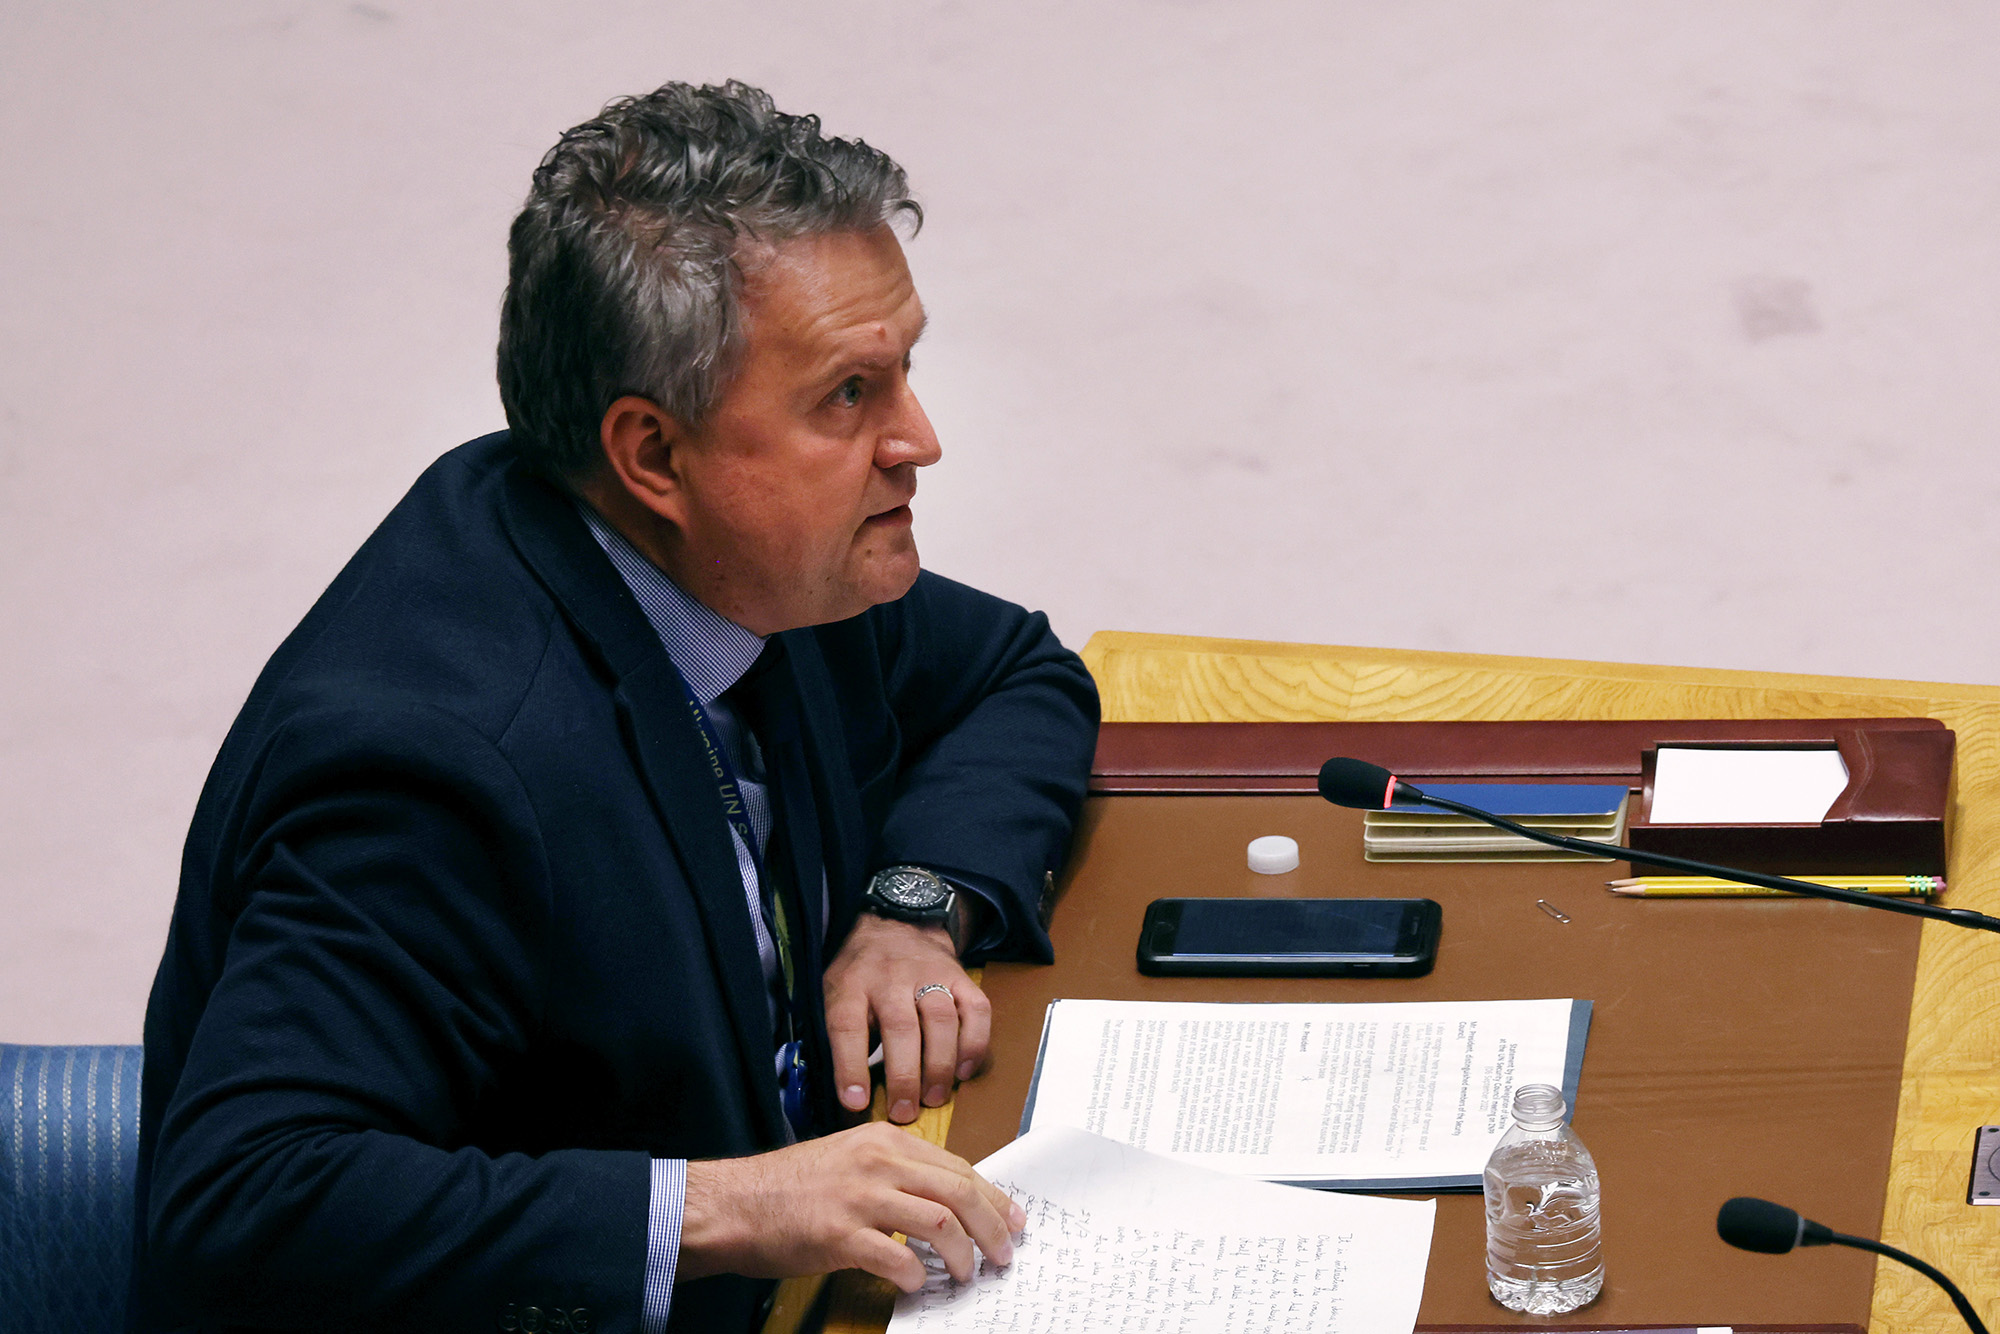 Ukrainian Ambassador to the United Nations Sergiy Kyslytsya attends a U.N. Security Council meeting on the situation at the Zaporizhzhia nuclear power plant in Ukraine at the United Nations Headquarters on September 6.